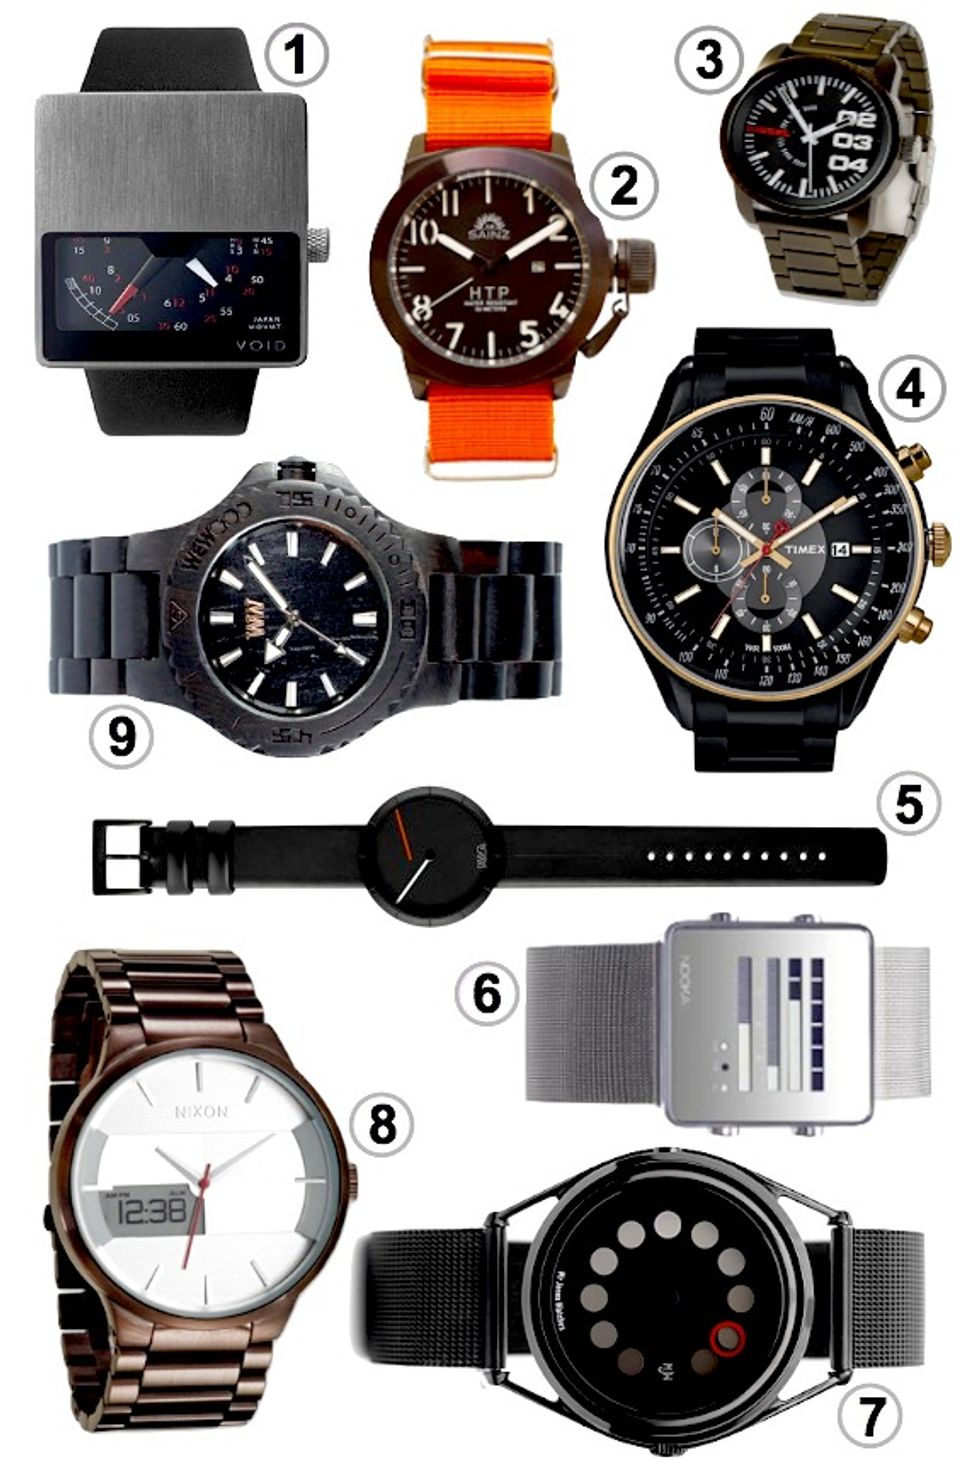 Look of the Week: Modern Men's Watches for Under $300